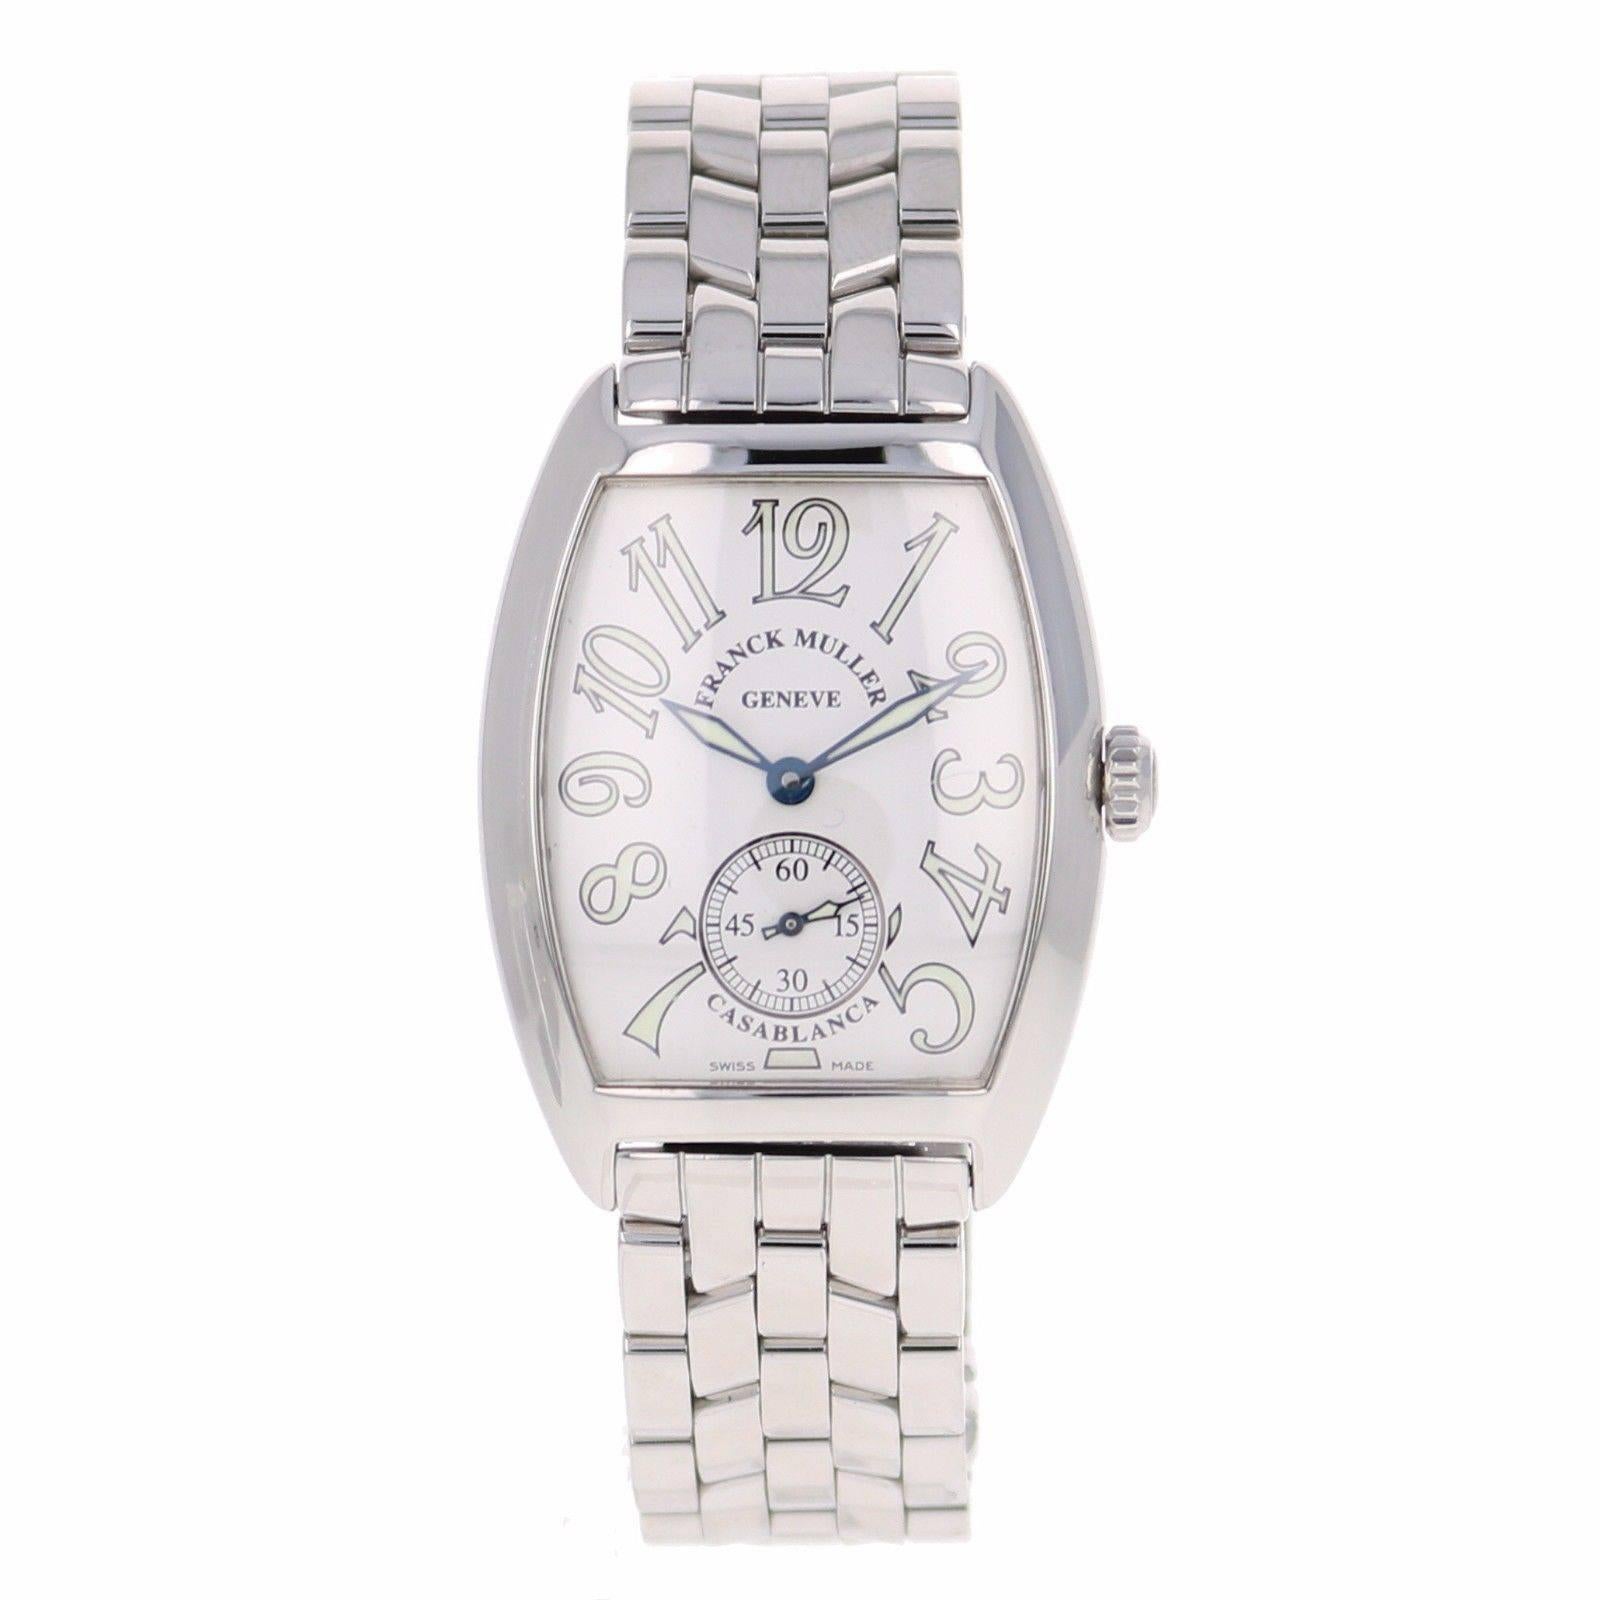 Brand Name	Franck Muller
Style Number	7502 S6
Series	Casablanca
Gender	Lady's 
Case Material	Stainless Steel
Dial Color	White
Movement	Manual Wind
Functions	Hours, Minutes, Seconds
Crystal Material	Sapphire
Case Diameter	33mm x